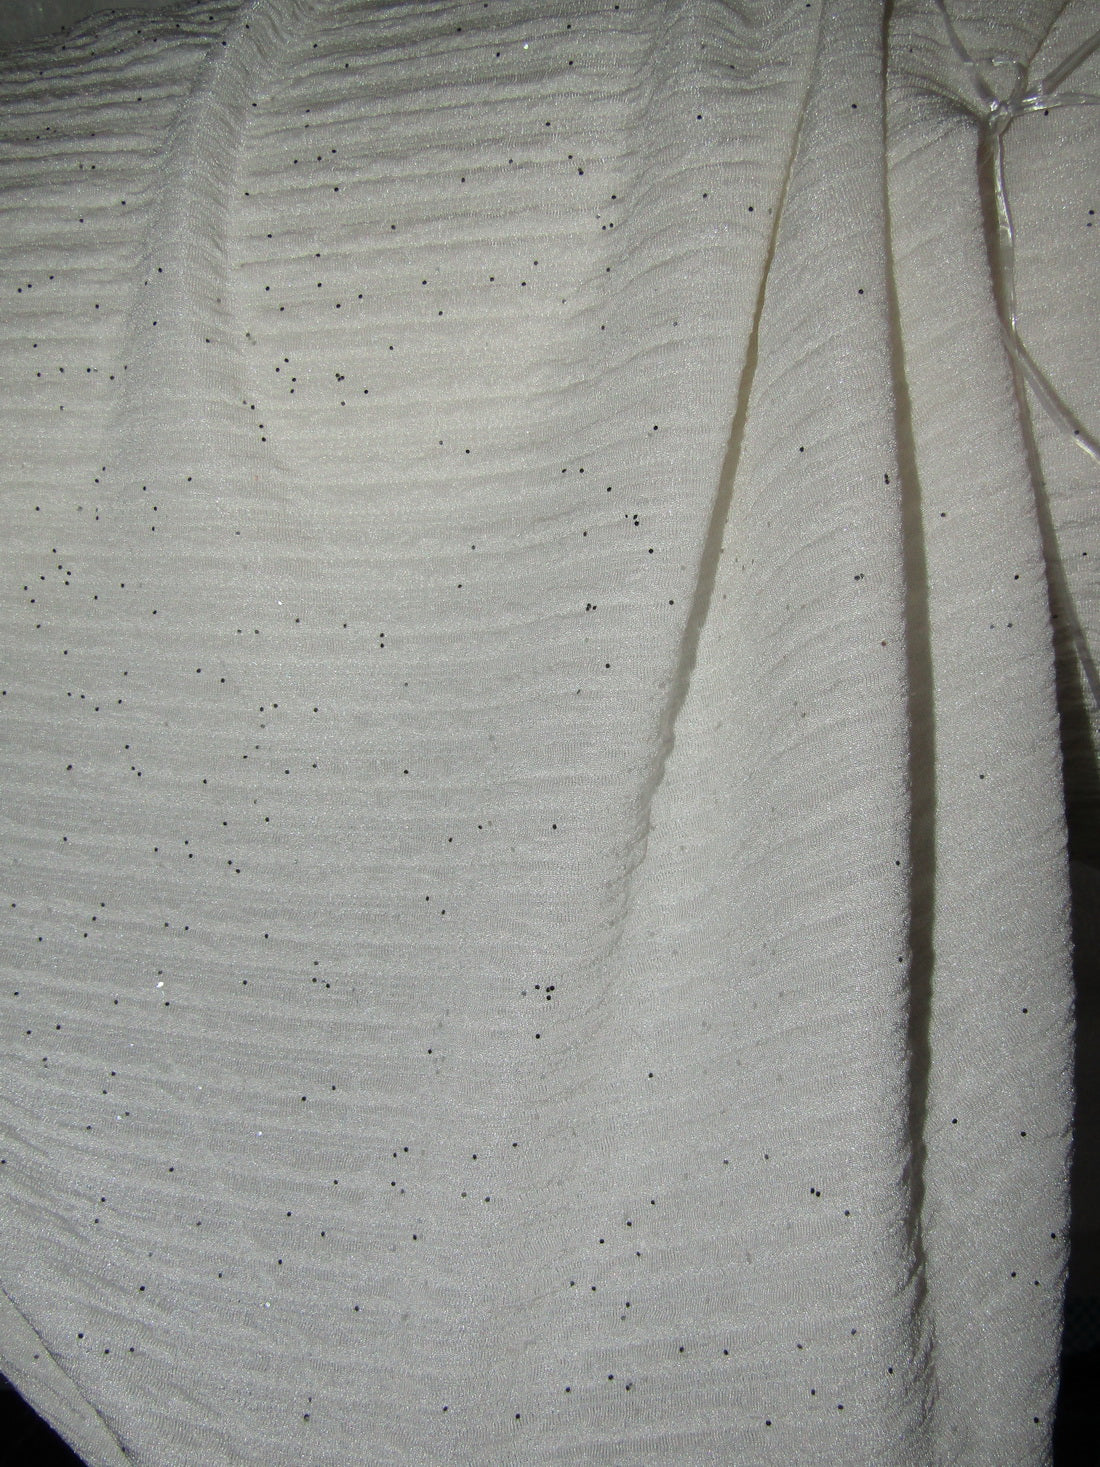 LYCRA Crushed polyester shimmer fabric WHITE color 58t" wide FF26